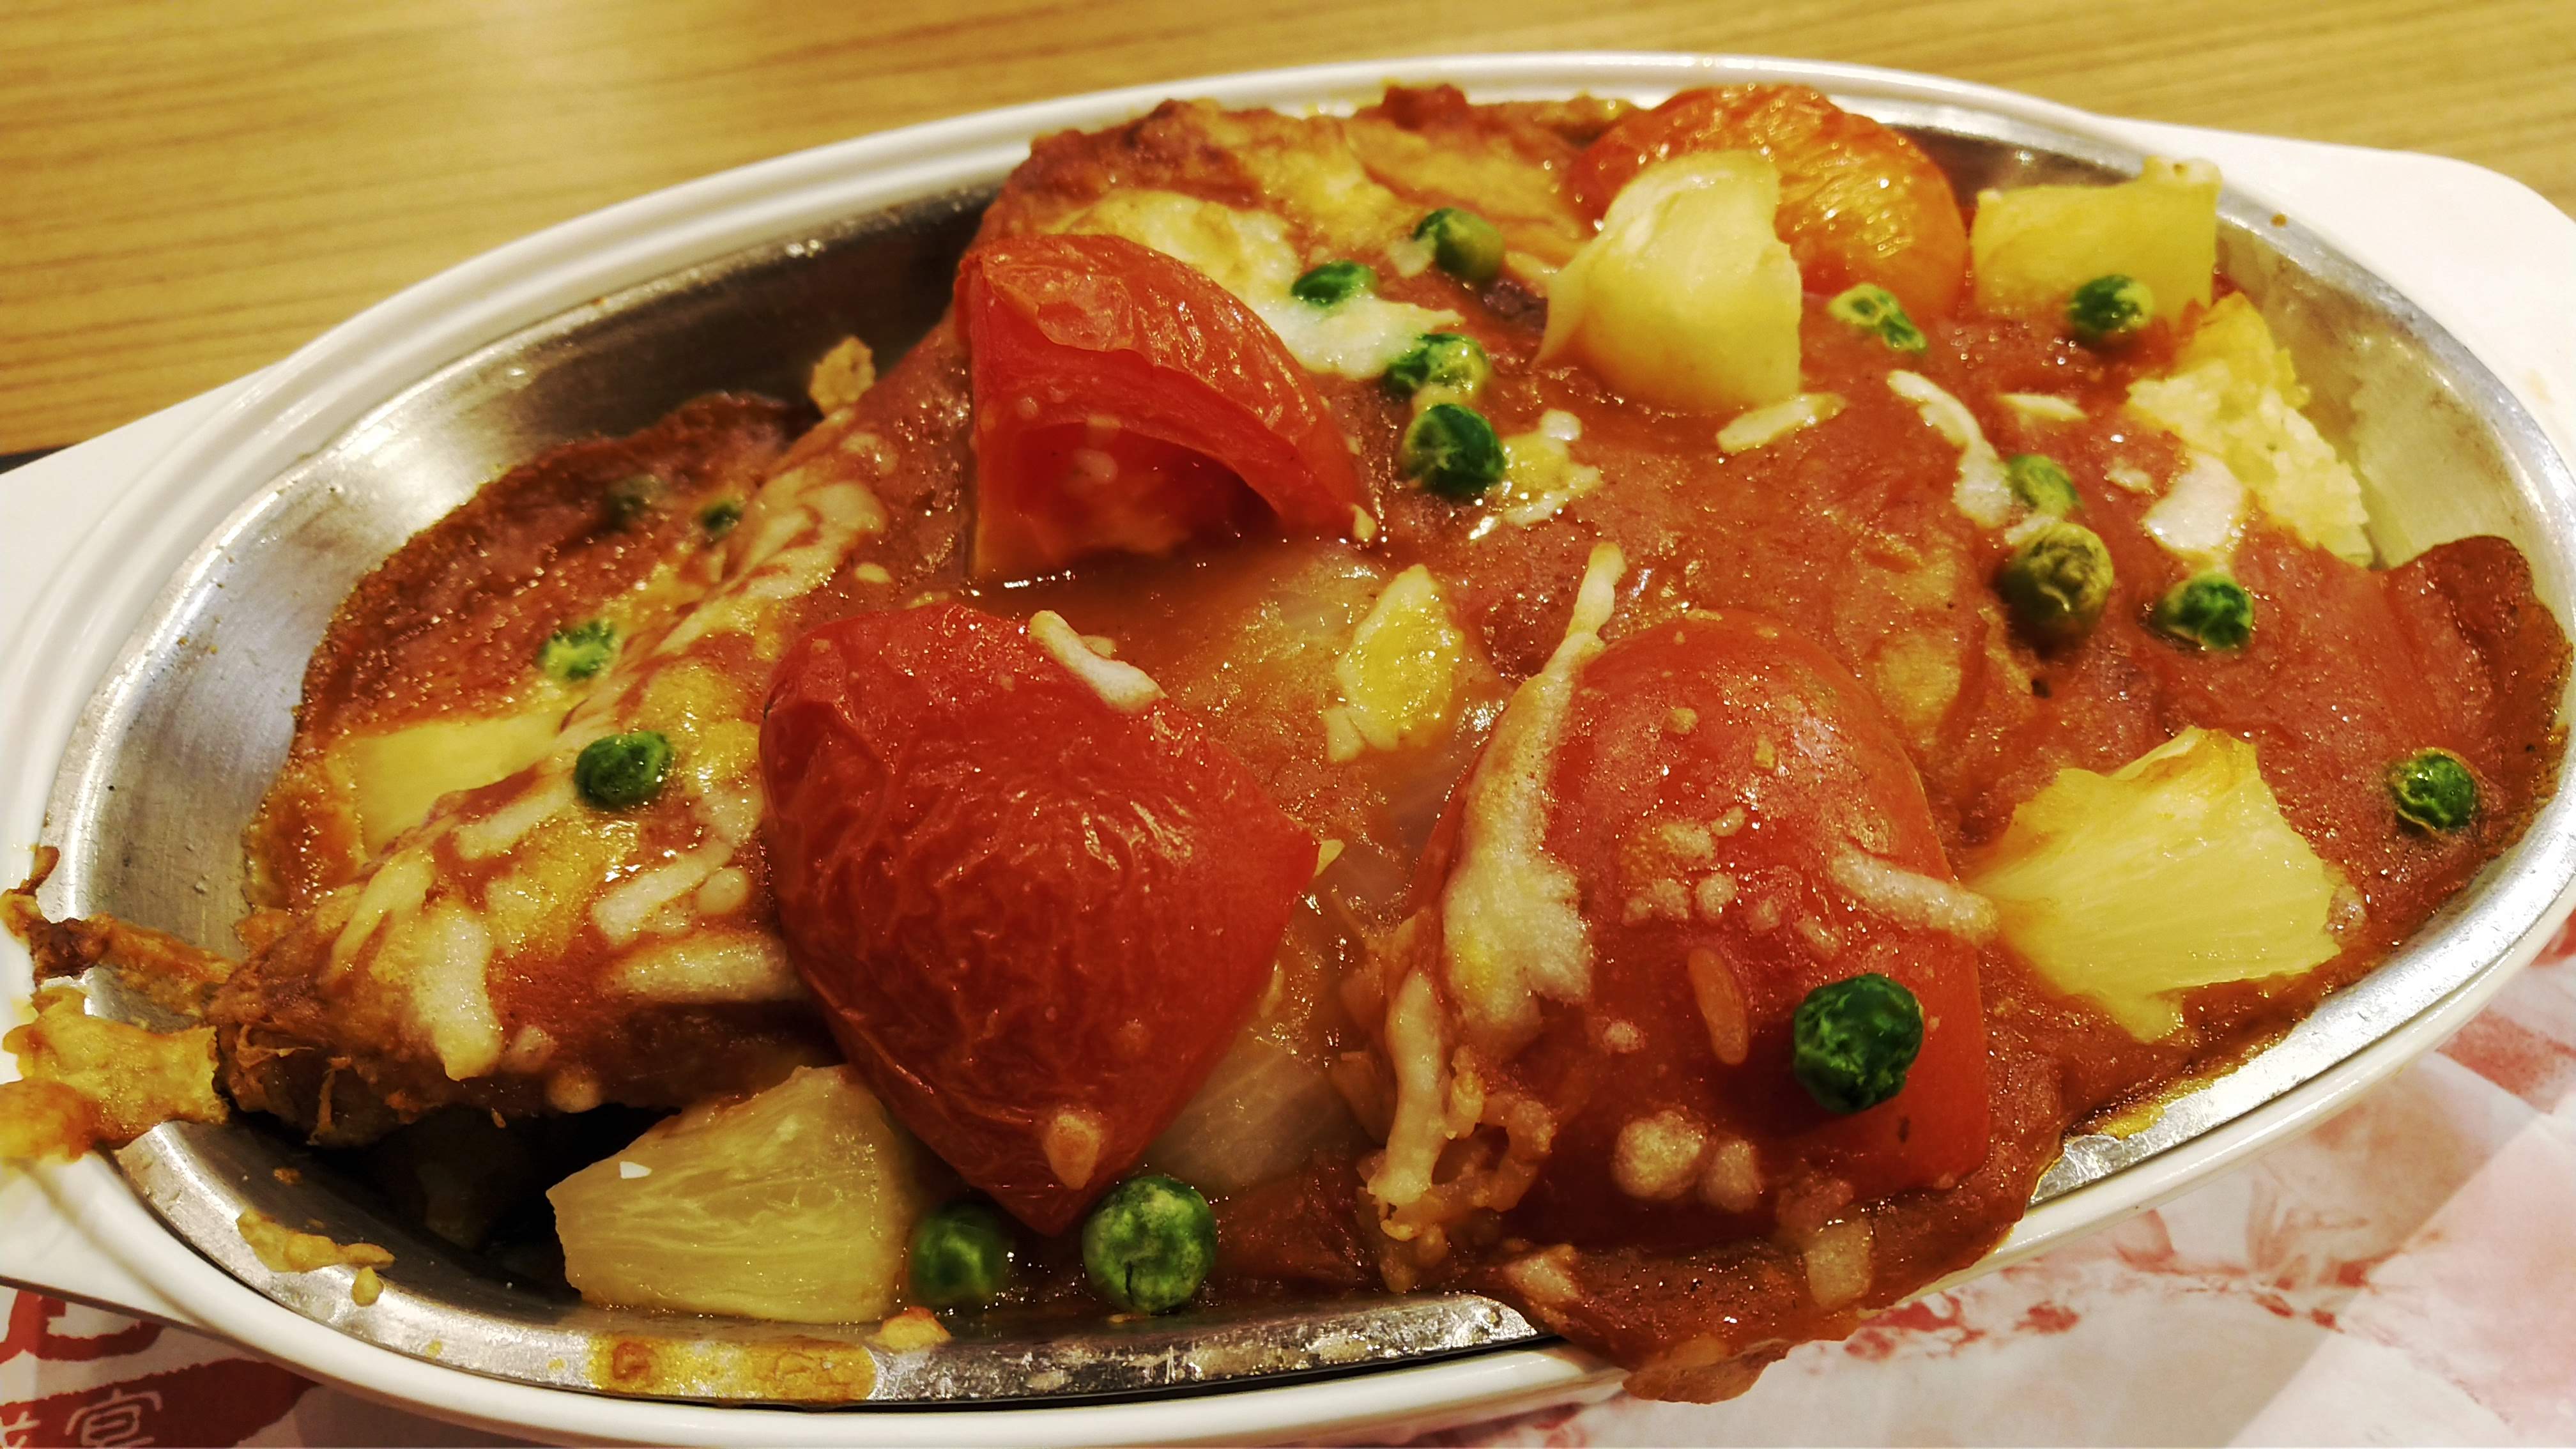 Baked pork chop rice with tomato and cheese